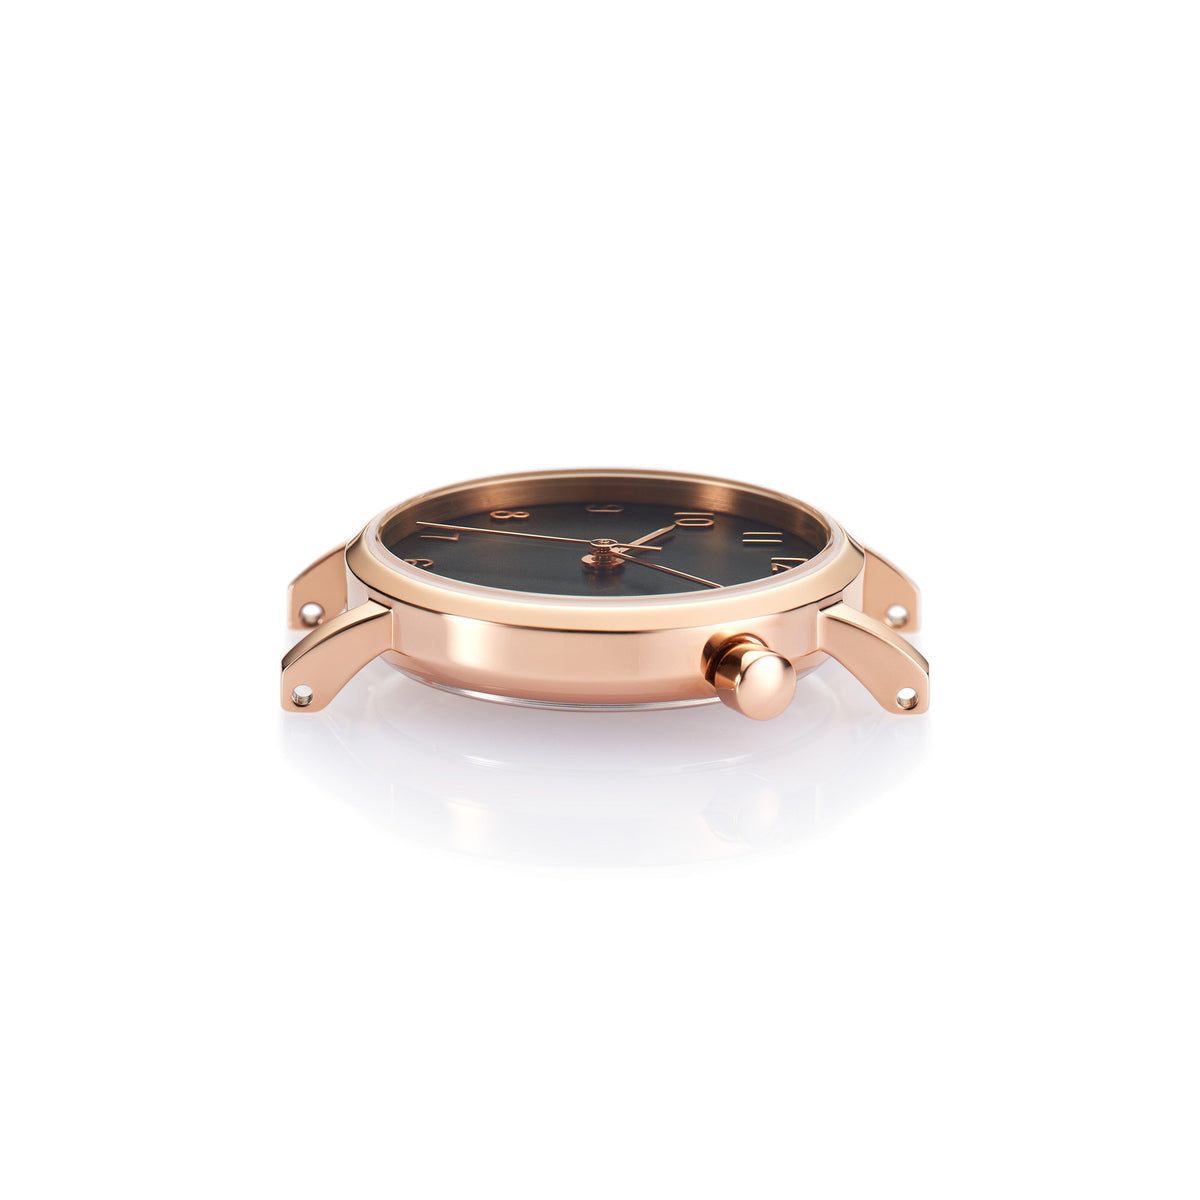 The Black and Rose Gold Watch -  Tropical (Kids)